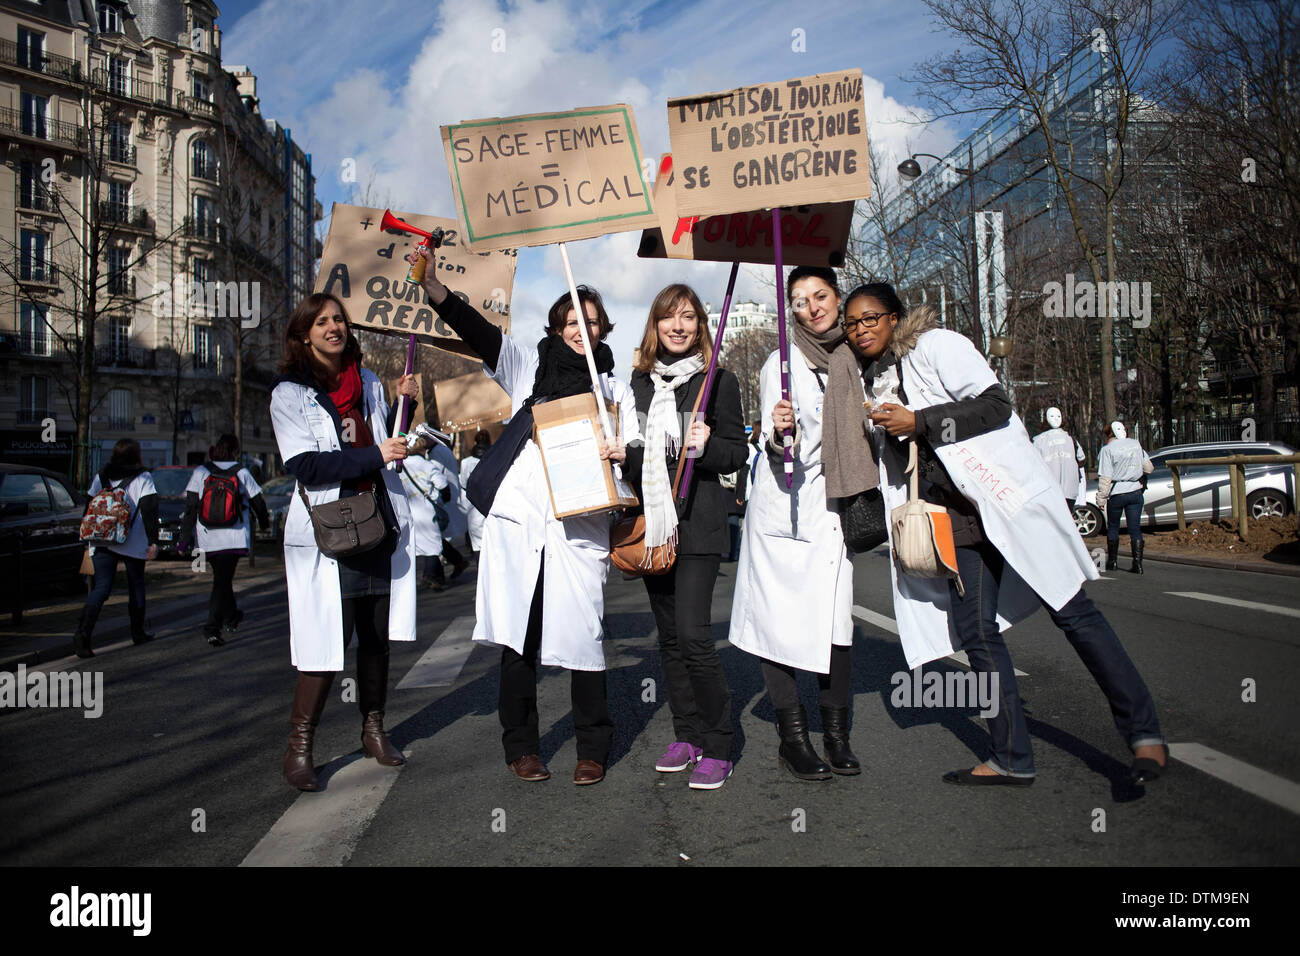 Paris, France. 19th Feb, 2014. Third demonstration of the midwives in Paris from Denfert Rochereau to the health ministery. They want to be recongnize as medical personnel. Some trouble start when the demonstrators try to pass over the police. Credit:  Michael Bunel/NurPhoto/ZUMAPRESS.com/Alamy Live News Stock Photo